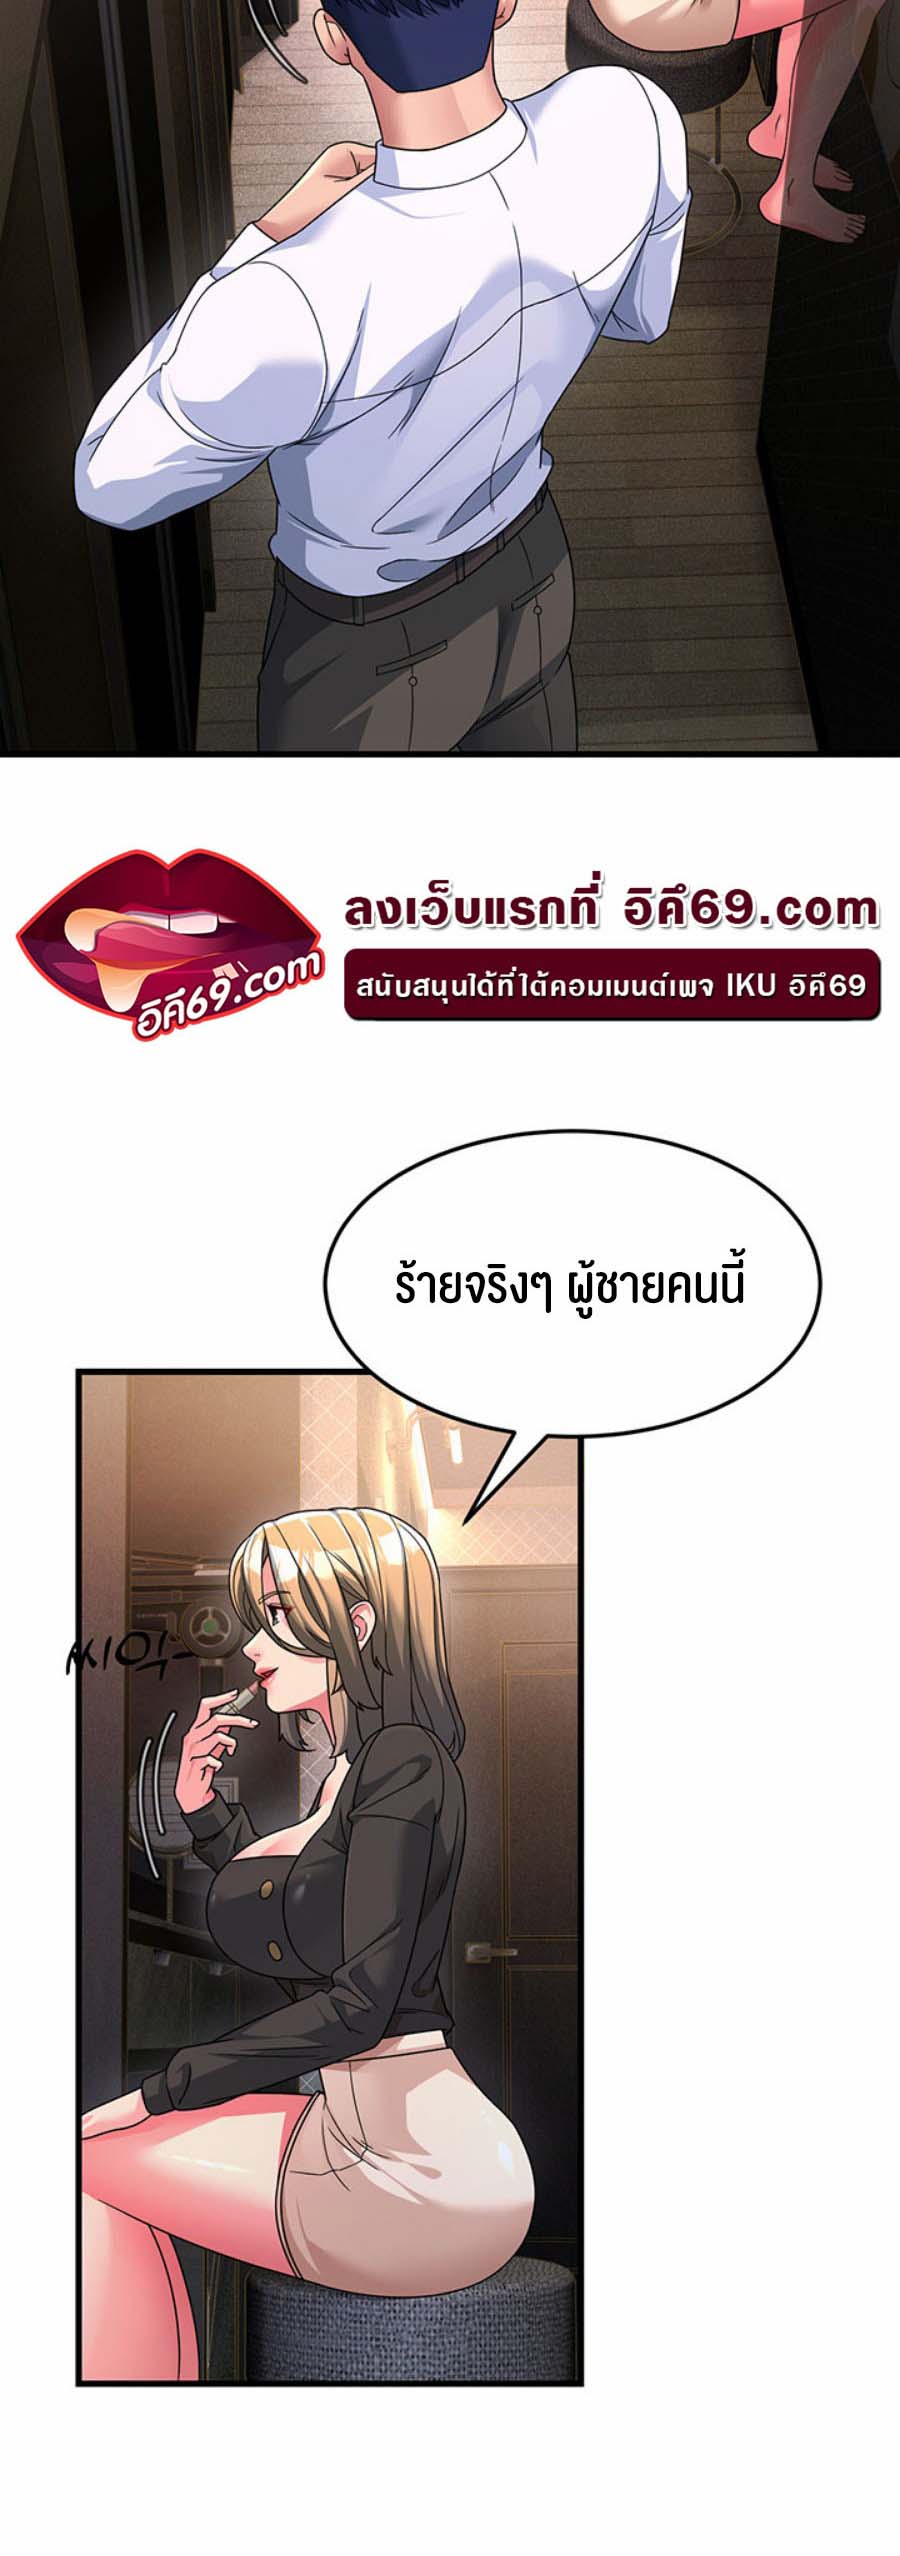 à¸­à¹ˆà¸²à¸™à¹‚à¸”à¸ˆà¸´à¸™ à¹€à¸£à¸·à¹ˆà¸­à¸‡ Mother in Law Bends To My Will 8 21